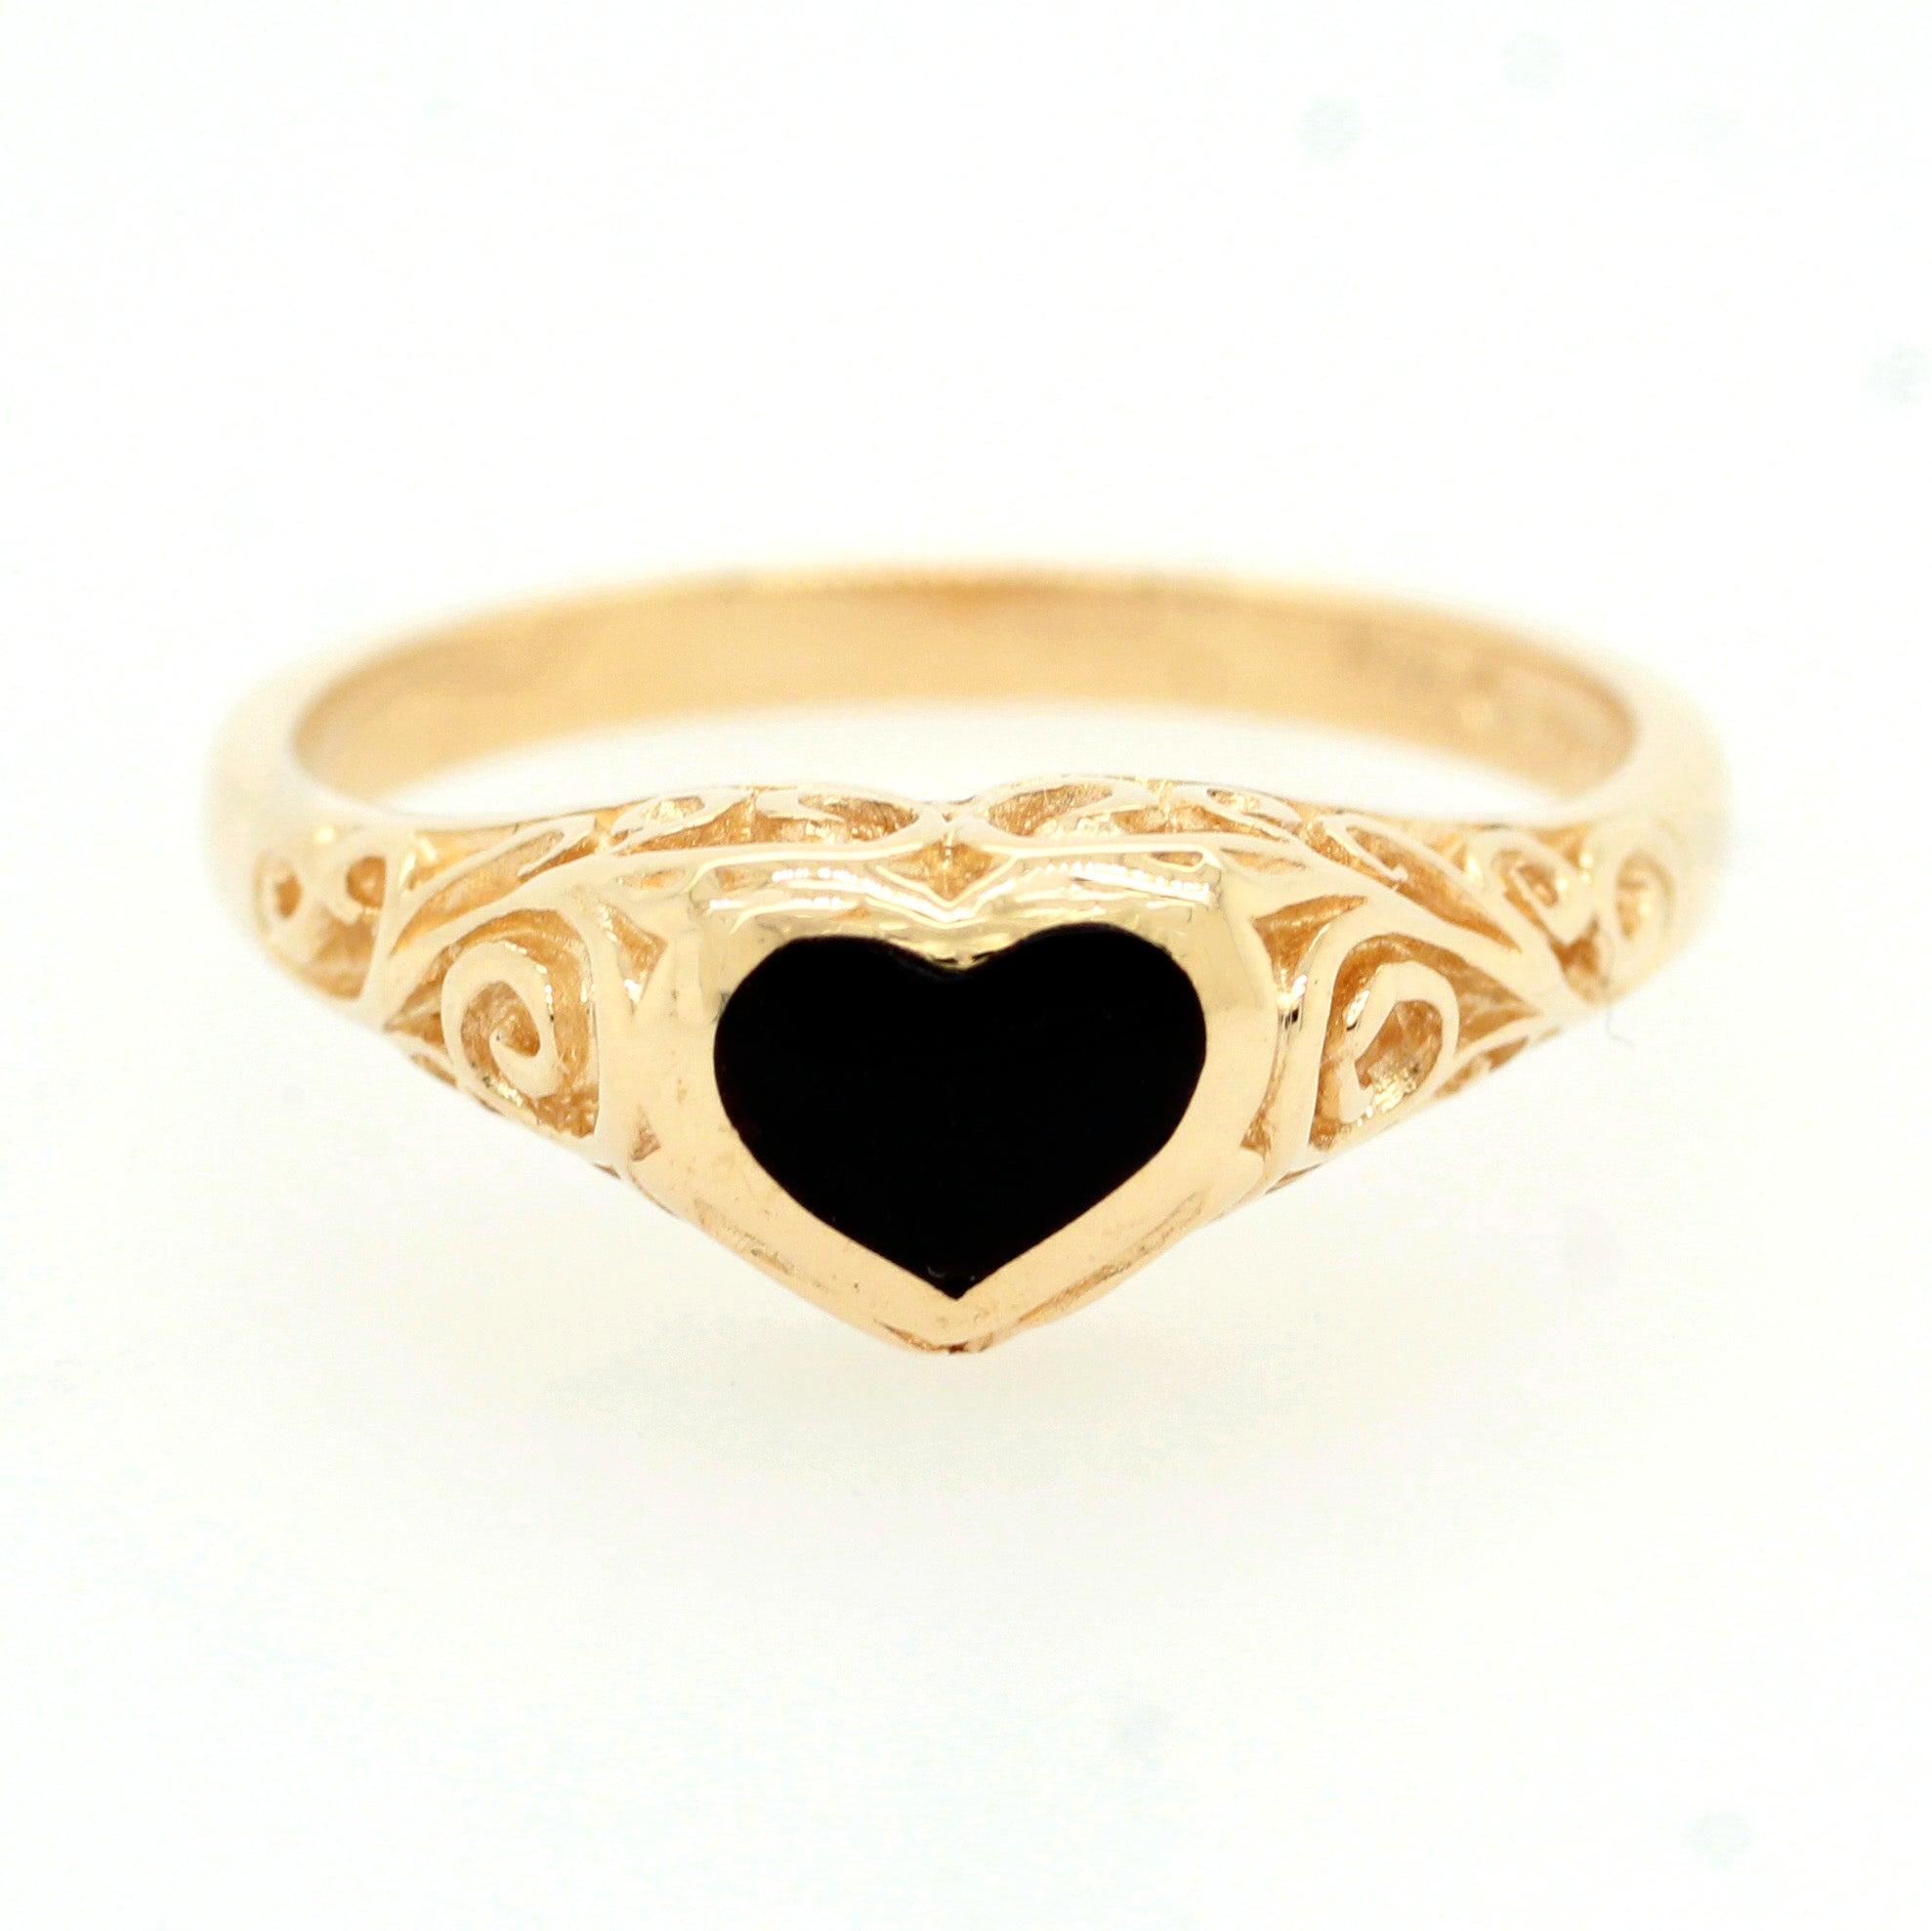 KABANA Onyx Inlay Black Heart Ring in 14k Yellow Gold with Filigree; Size 6.25